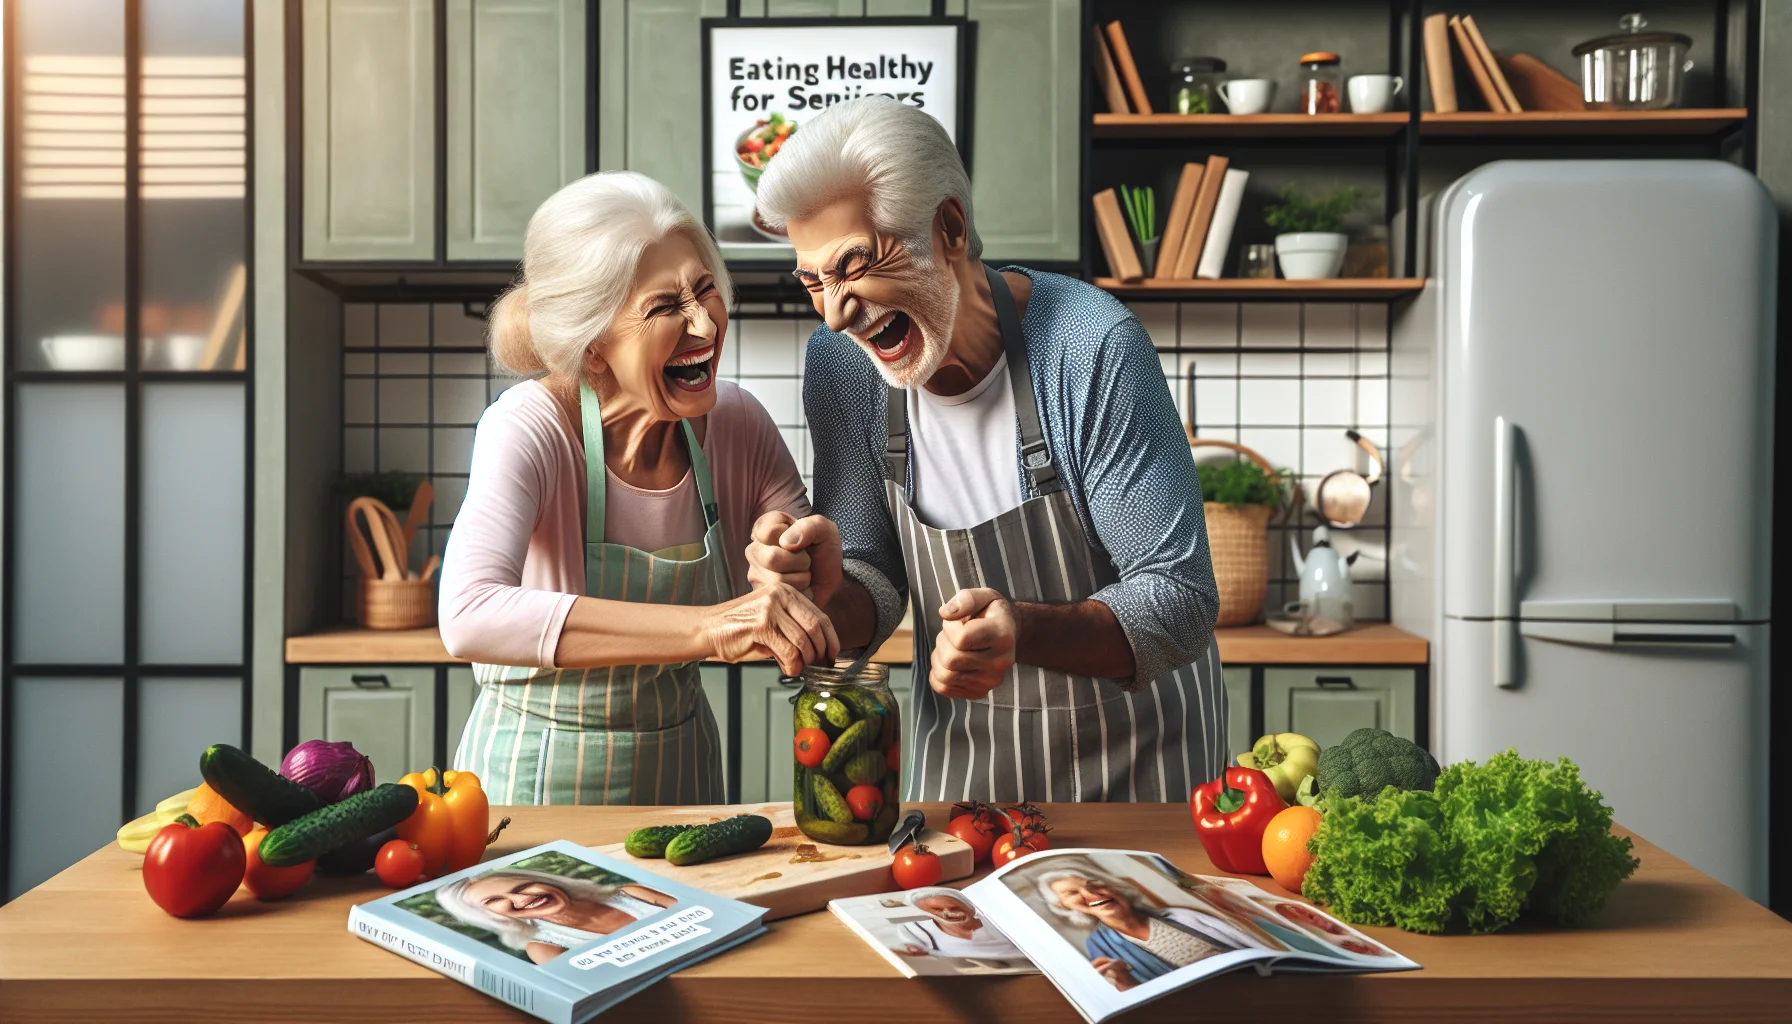 Generate a humorous, realistic image representing an elderly couple engaging in cooking. The couple is Caucasian, one male and one female, both wearing colorful aprons. They stand in a modern, well-lit kitchen filled with fresh fruits and vegetables indicating a healthy diet. The gentleman is struggling to open a jar of pickles while the lady is laughing heartily at his efforts. There are cookbooks titled 'Eating Healthy for Seniors' and 'One-Pot Diet Recipes' sprawled on the kitchen counter. They are playfully attempting to make a salad, with a few lettuce leaves whimsically tossed in the air.